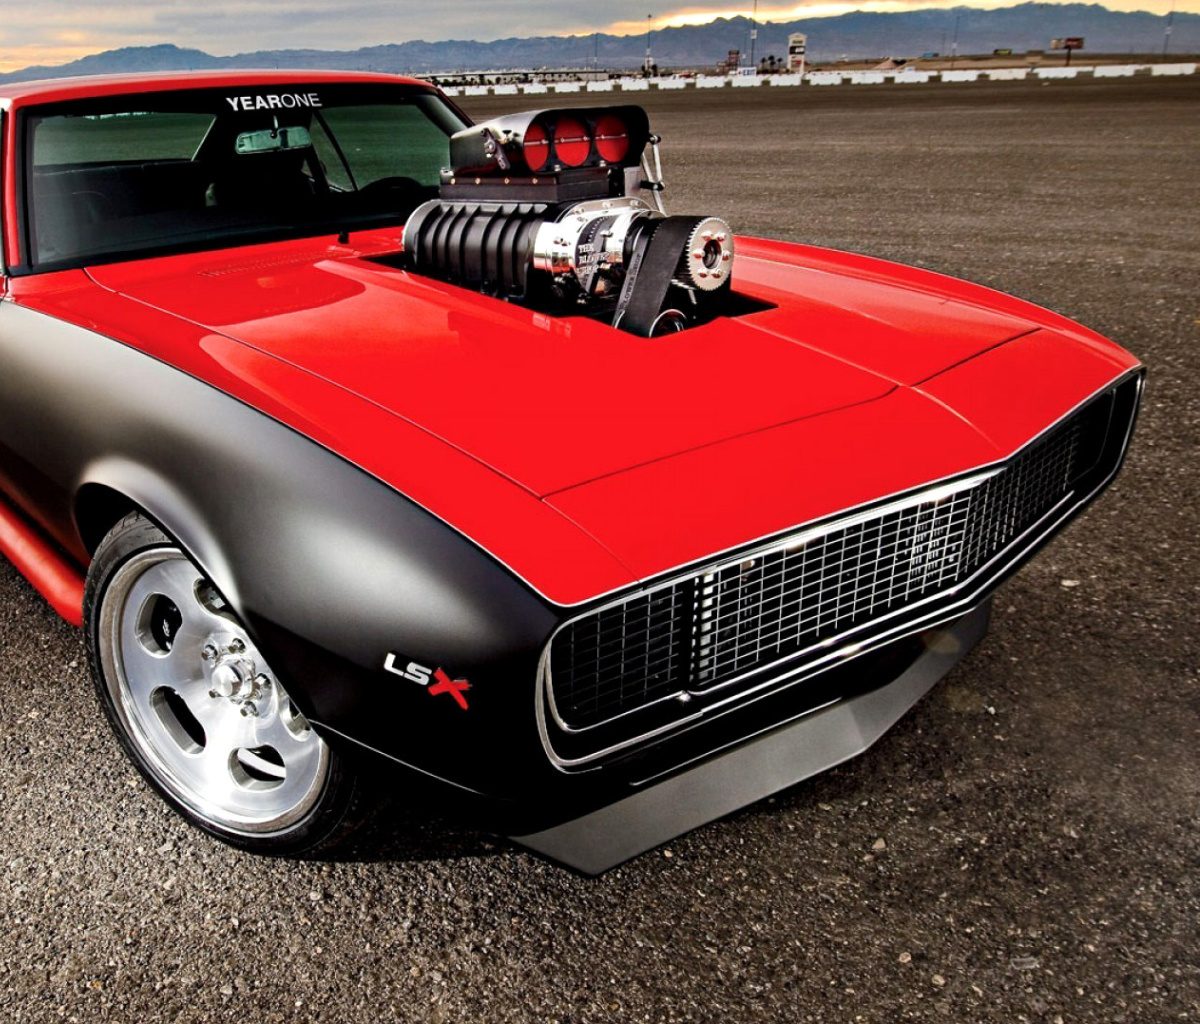 Chevrolet Hot Rod Muscle Car with GM Engine screenshot #1 1200x1024